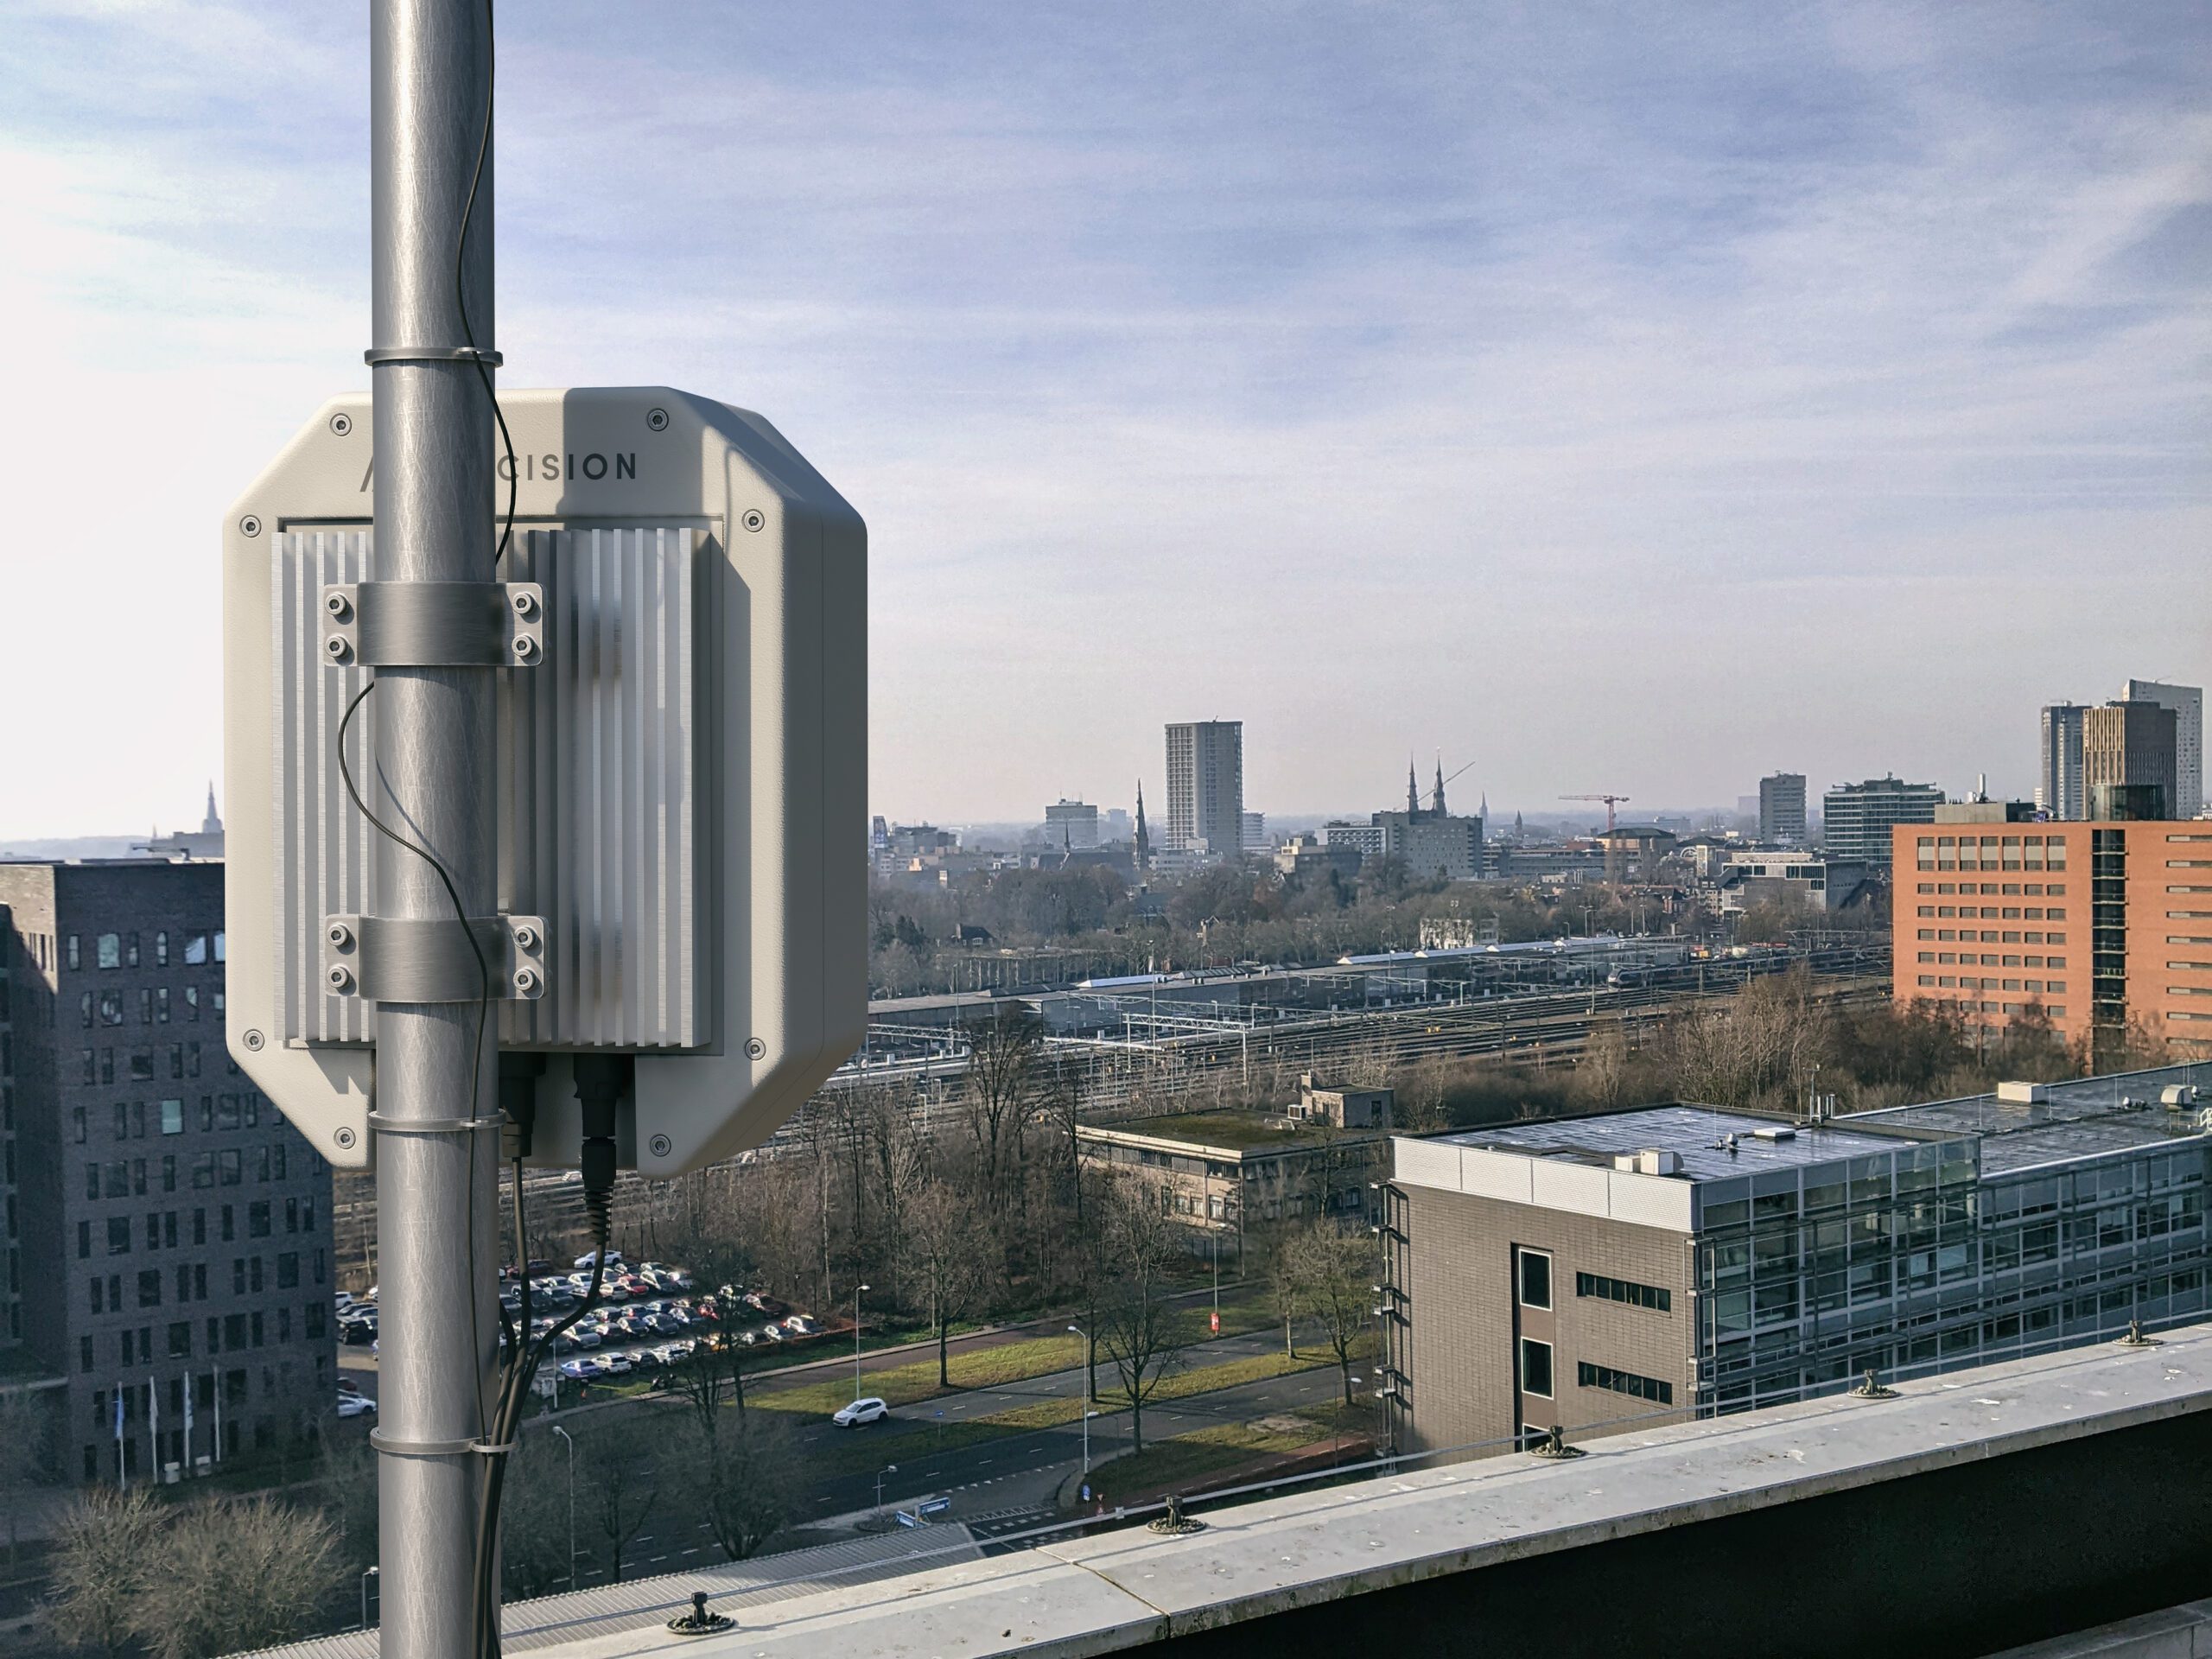 Aircision Connecting Beyond Boundaries: The City of Light’s First Optical Wireless Communications Link over 5 km